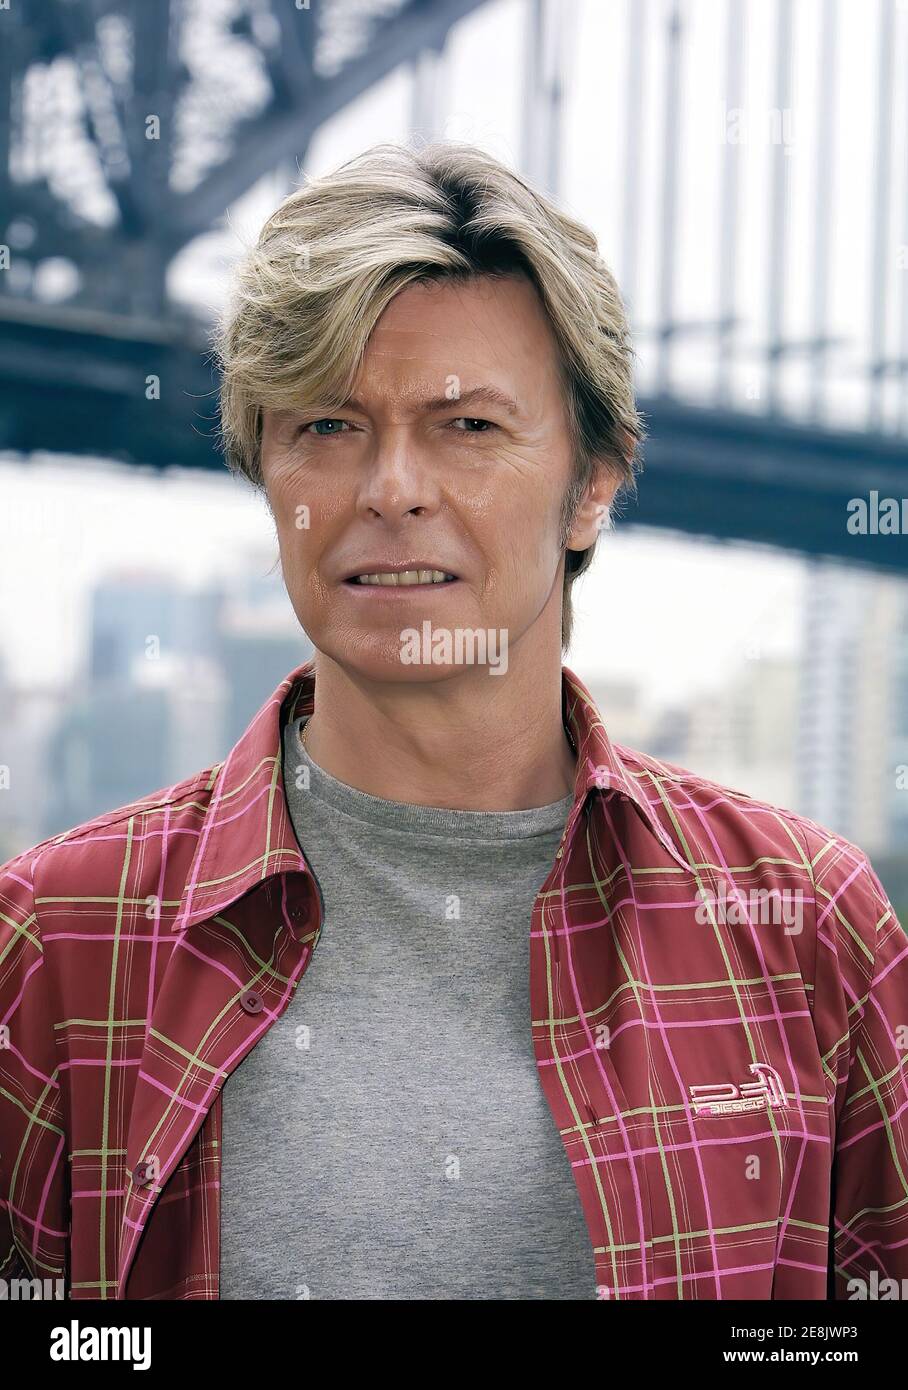 David Bowie at his Reality Tour press conference, Sydney, Australia. David  poses for publicity photos with the Sydney Harbour Bridge in the background  Stock Photo - Alamy